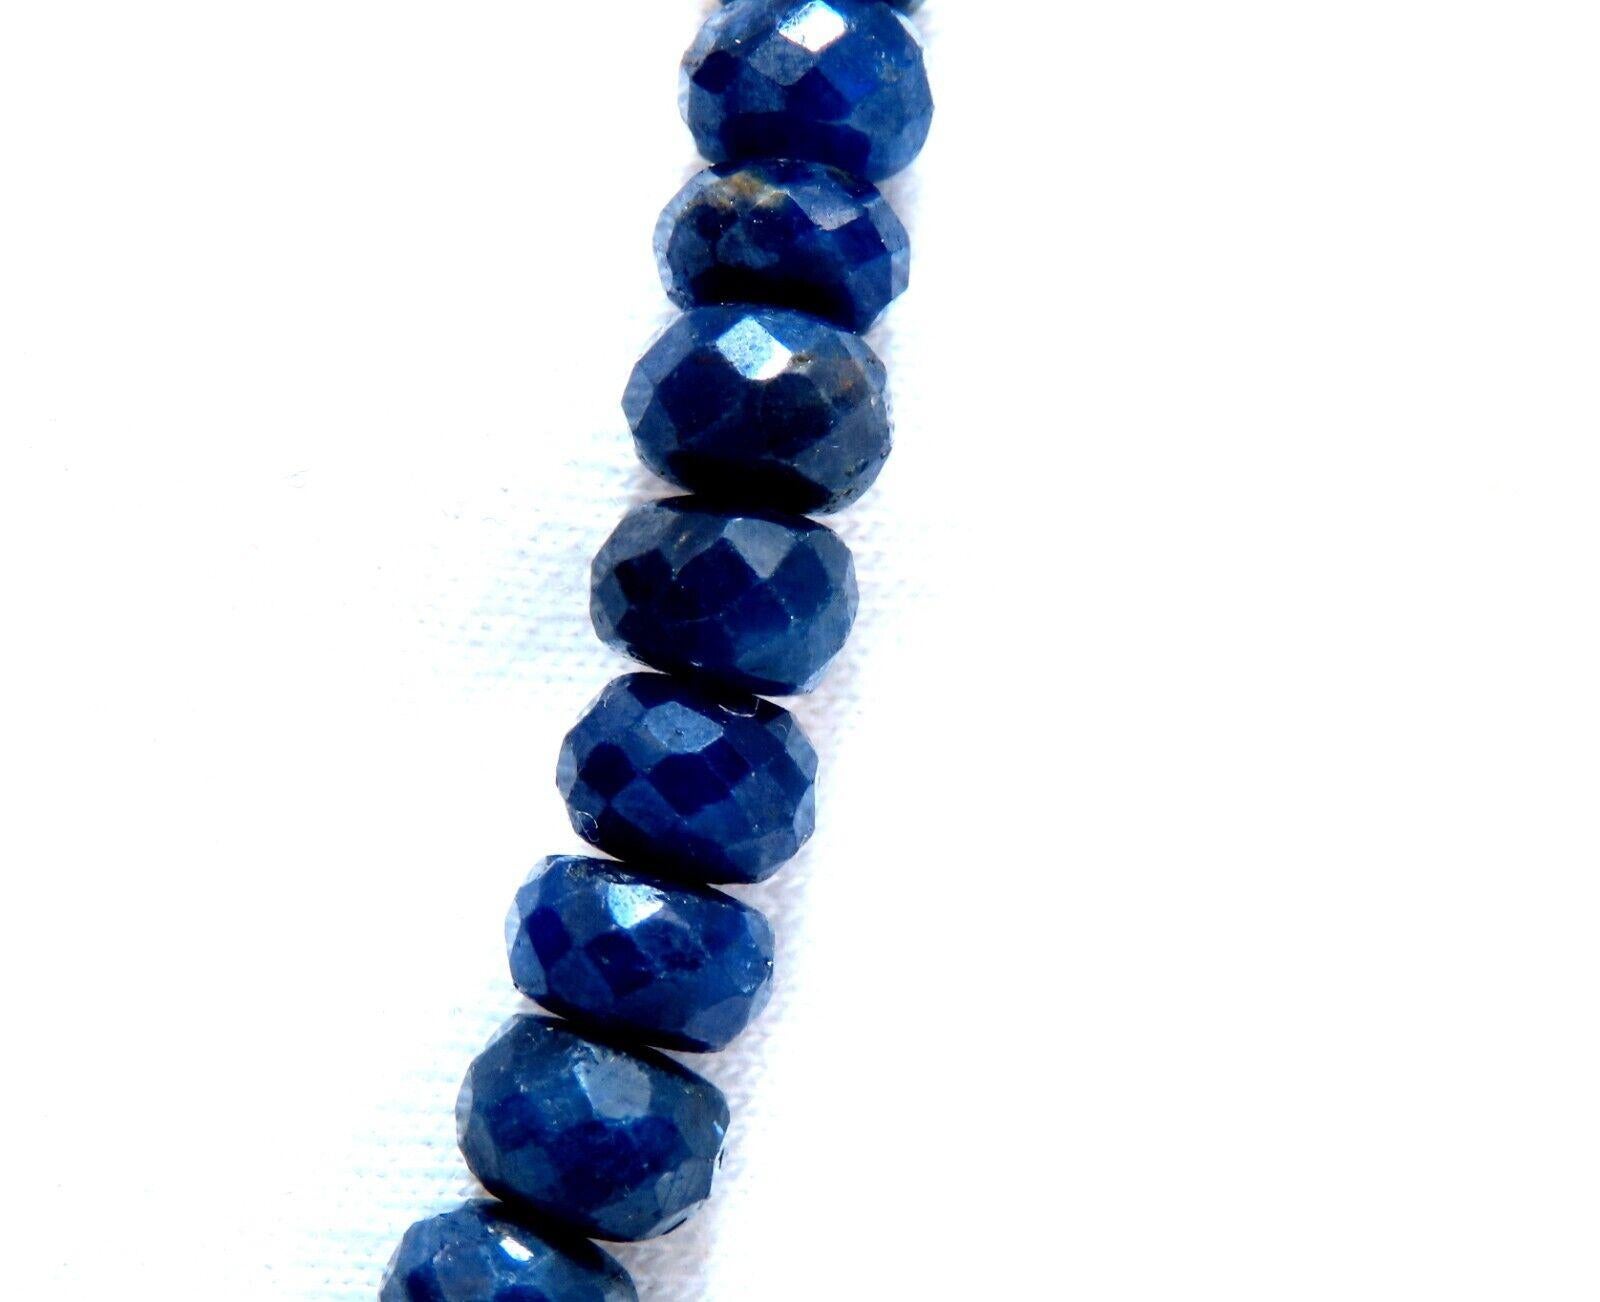 17-in beaded natural Sapphire necklace.

5 1/2 mm sapphires

Translucent brilliant cuts

13 mm clasp